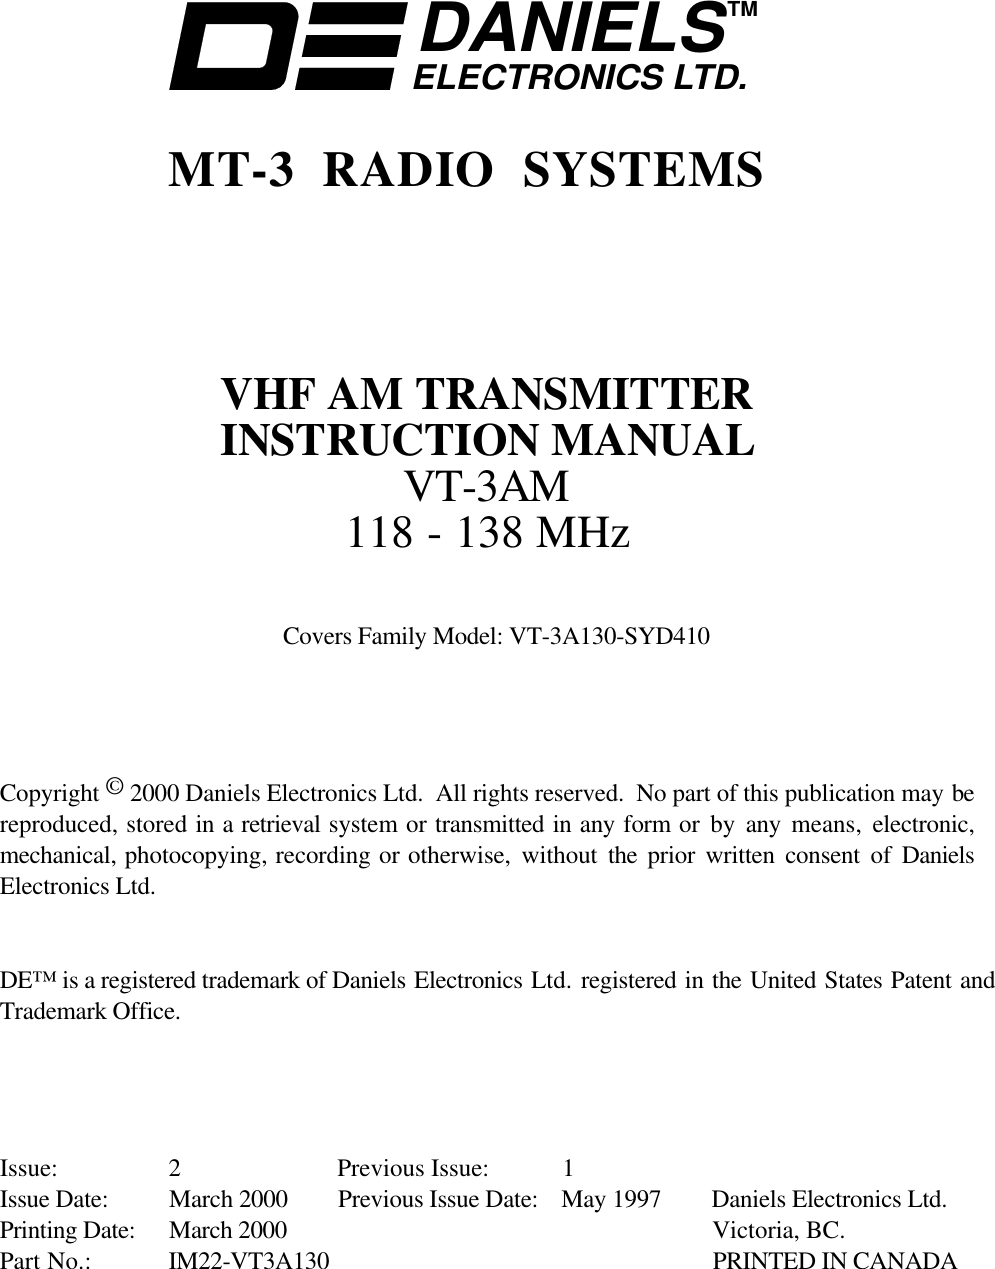 DANIELSELECTRONICS LTD.TMMT-3 RADIO SYSTEMSVHF AM TRANSMITTERINSTRUCTION MANUALVT-3AM118 - 138 MHzCovers Family Model: VT-3A130-SYD410Copyright © 2000 Daniels Electronics Ltd.  All rights reserved.  No part of this publication may bereproduced, stored in a retrieval system or transmitted in any form or by any means,  electronic,mechanical, photocopying, recording or otherwise, without the  prior written consent of DanielsElectronics Ltd.DE™ is a registered trademark of Daniels Electronics Ltd. registered in the United States Patent andTrademark Office.Issue: 2 Previous Issue: 1Issue Date: March 2000 Previous Issue Date: May 1997 Daniels Electronics Ltd.Printing Date: March 2000 Victoria, BC.Part No.: IM22-VT3A130 PRINTED IN CANADA